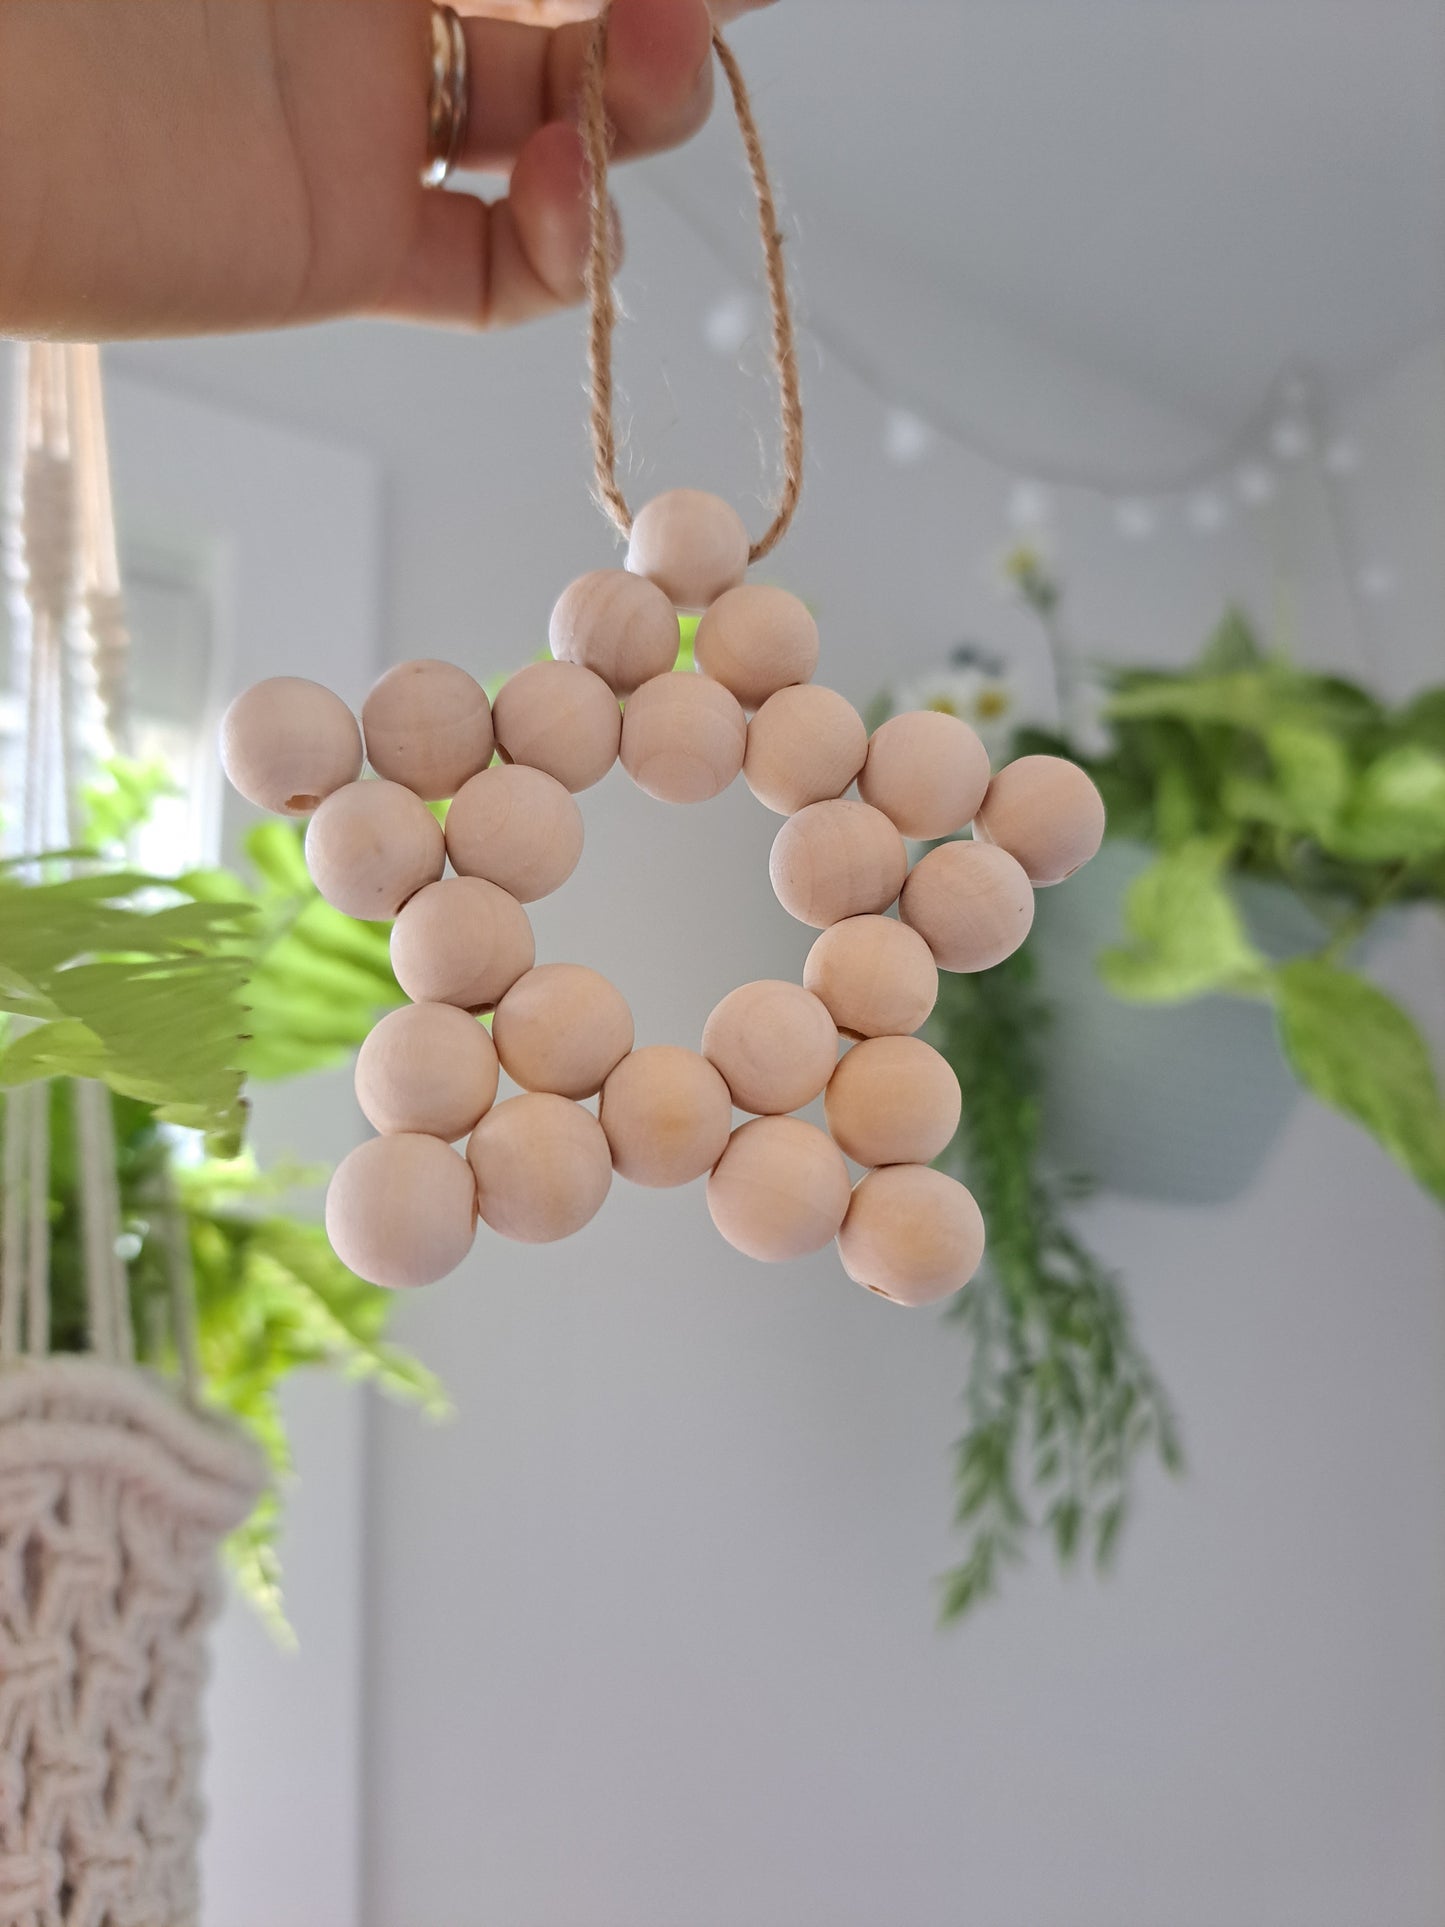 Weathered Landing's handmade wooden bead star. Beautiful in a nursery for a Scandi, boho, or modern farmhouse feel. Works great with neutral decor and is made with wood and jute. Find wooden bead stars at Weathered Landing. Located in Komoka, Ontario. Shipping to Canada and US.